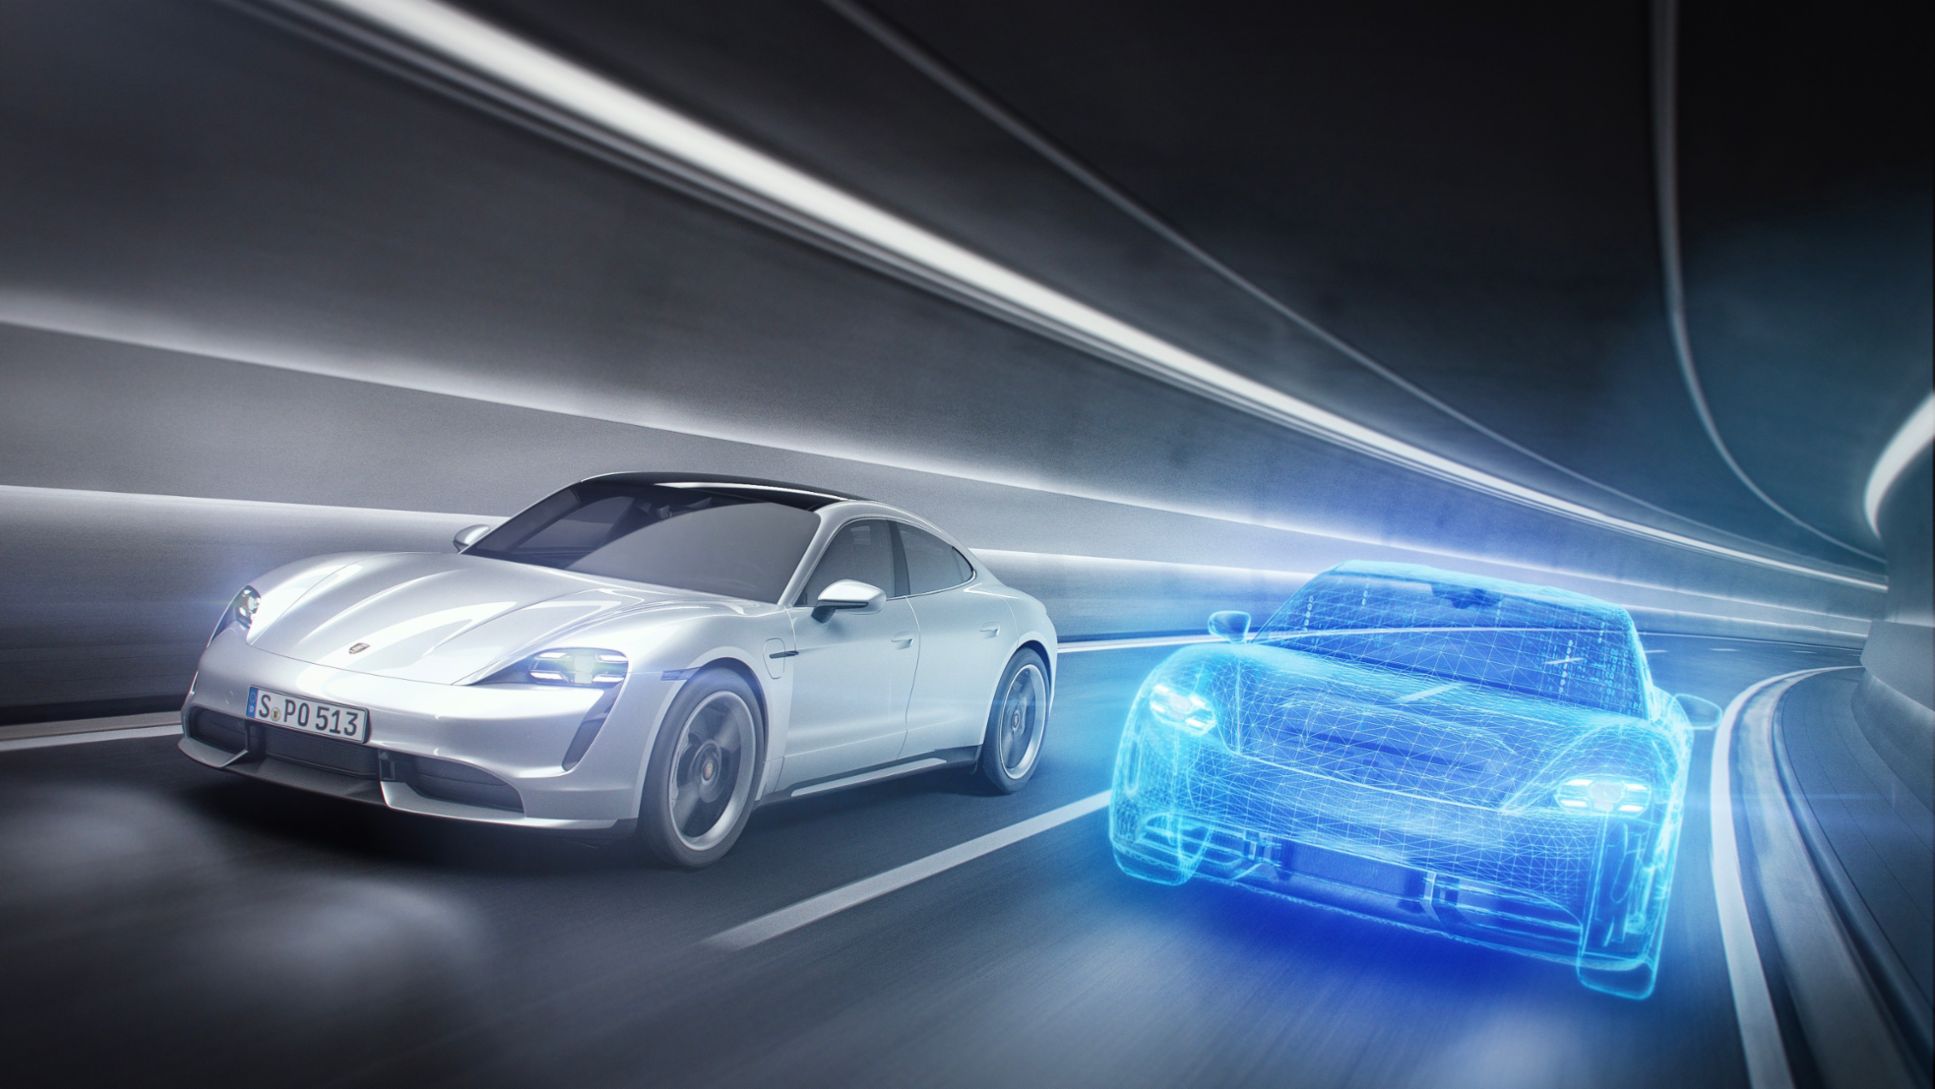 "Porsche's digital twin tells you when it's time to take your iron horse to the service station